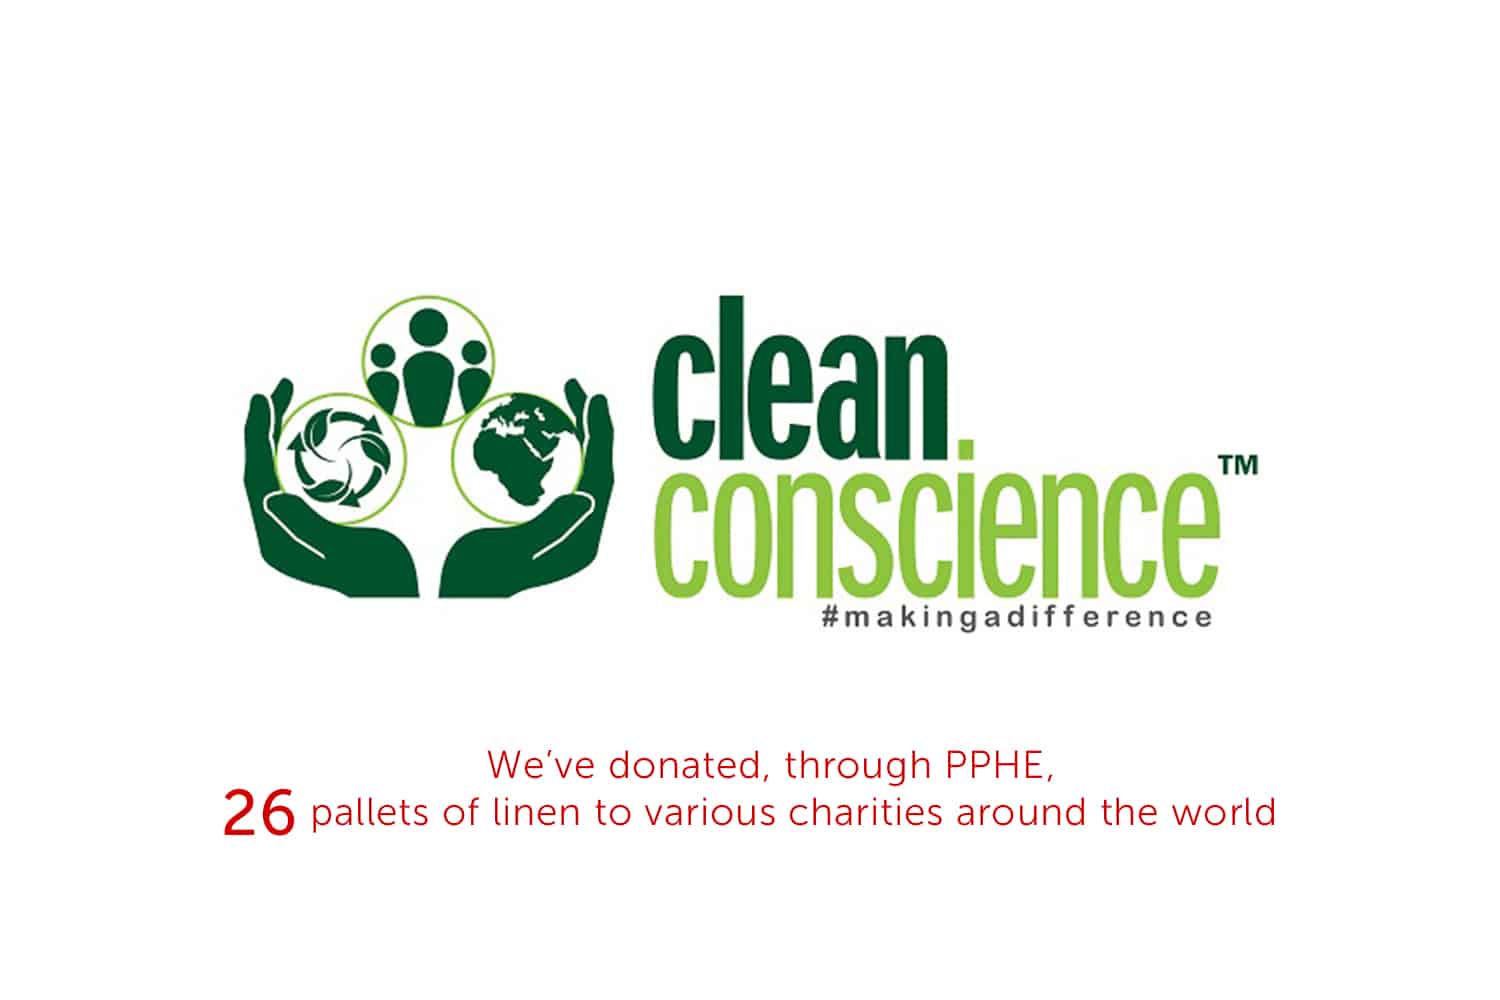 clean conscience linen donated people in need